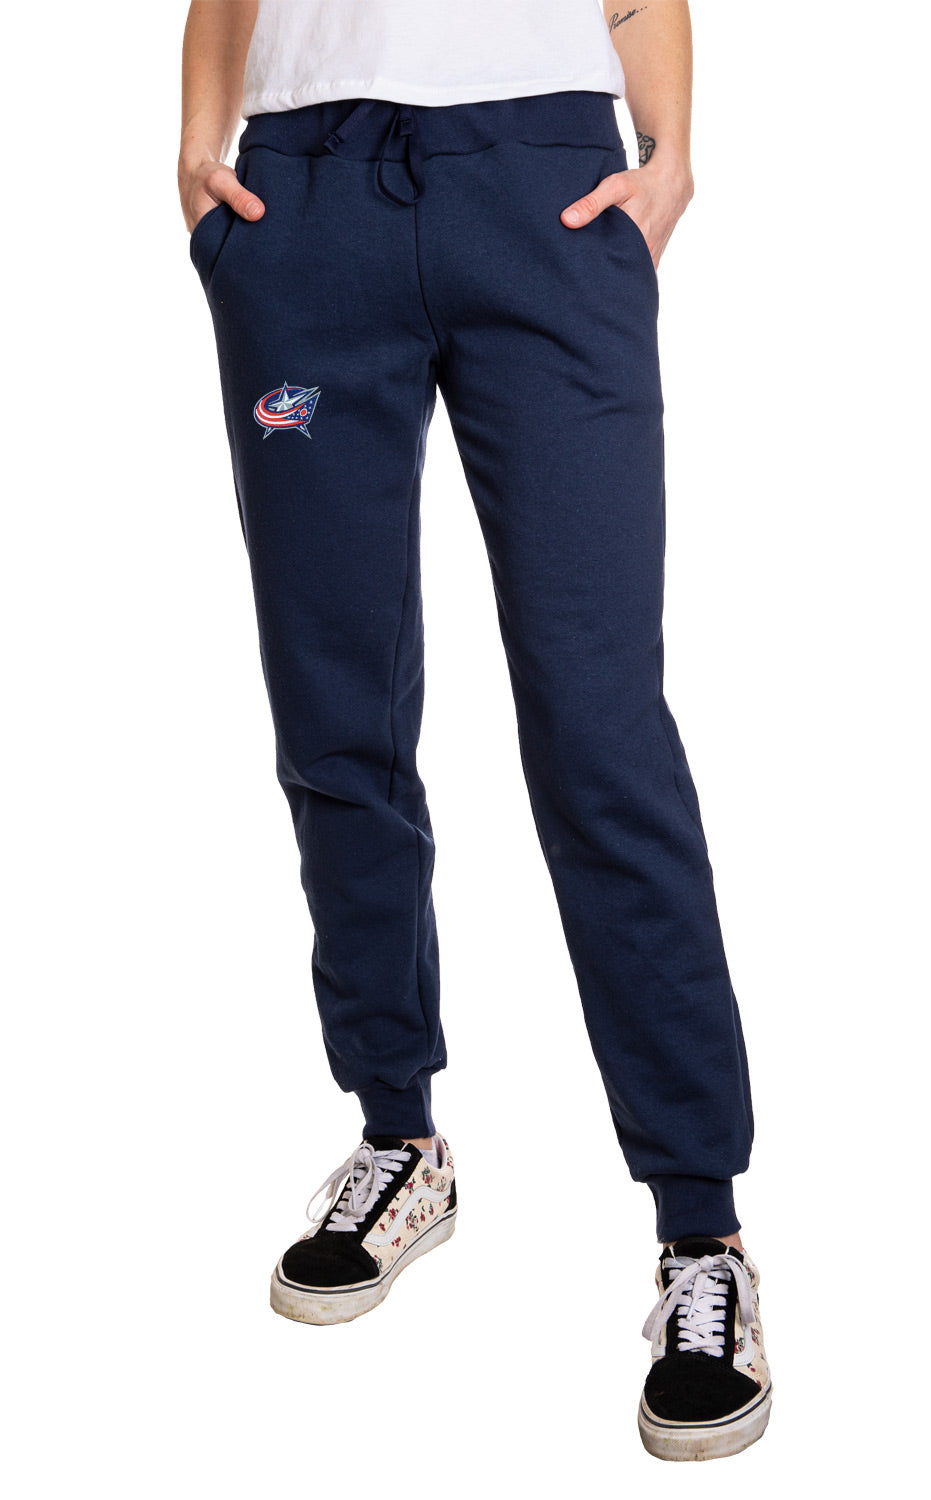 Columbus Blue Jackets Ladies Cuffed Jogger Style Track Pants